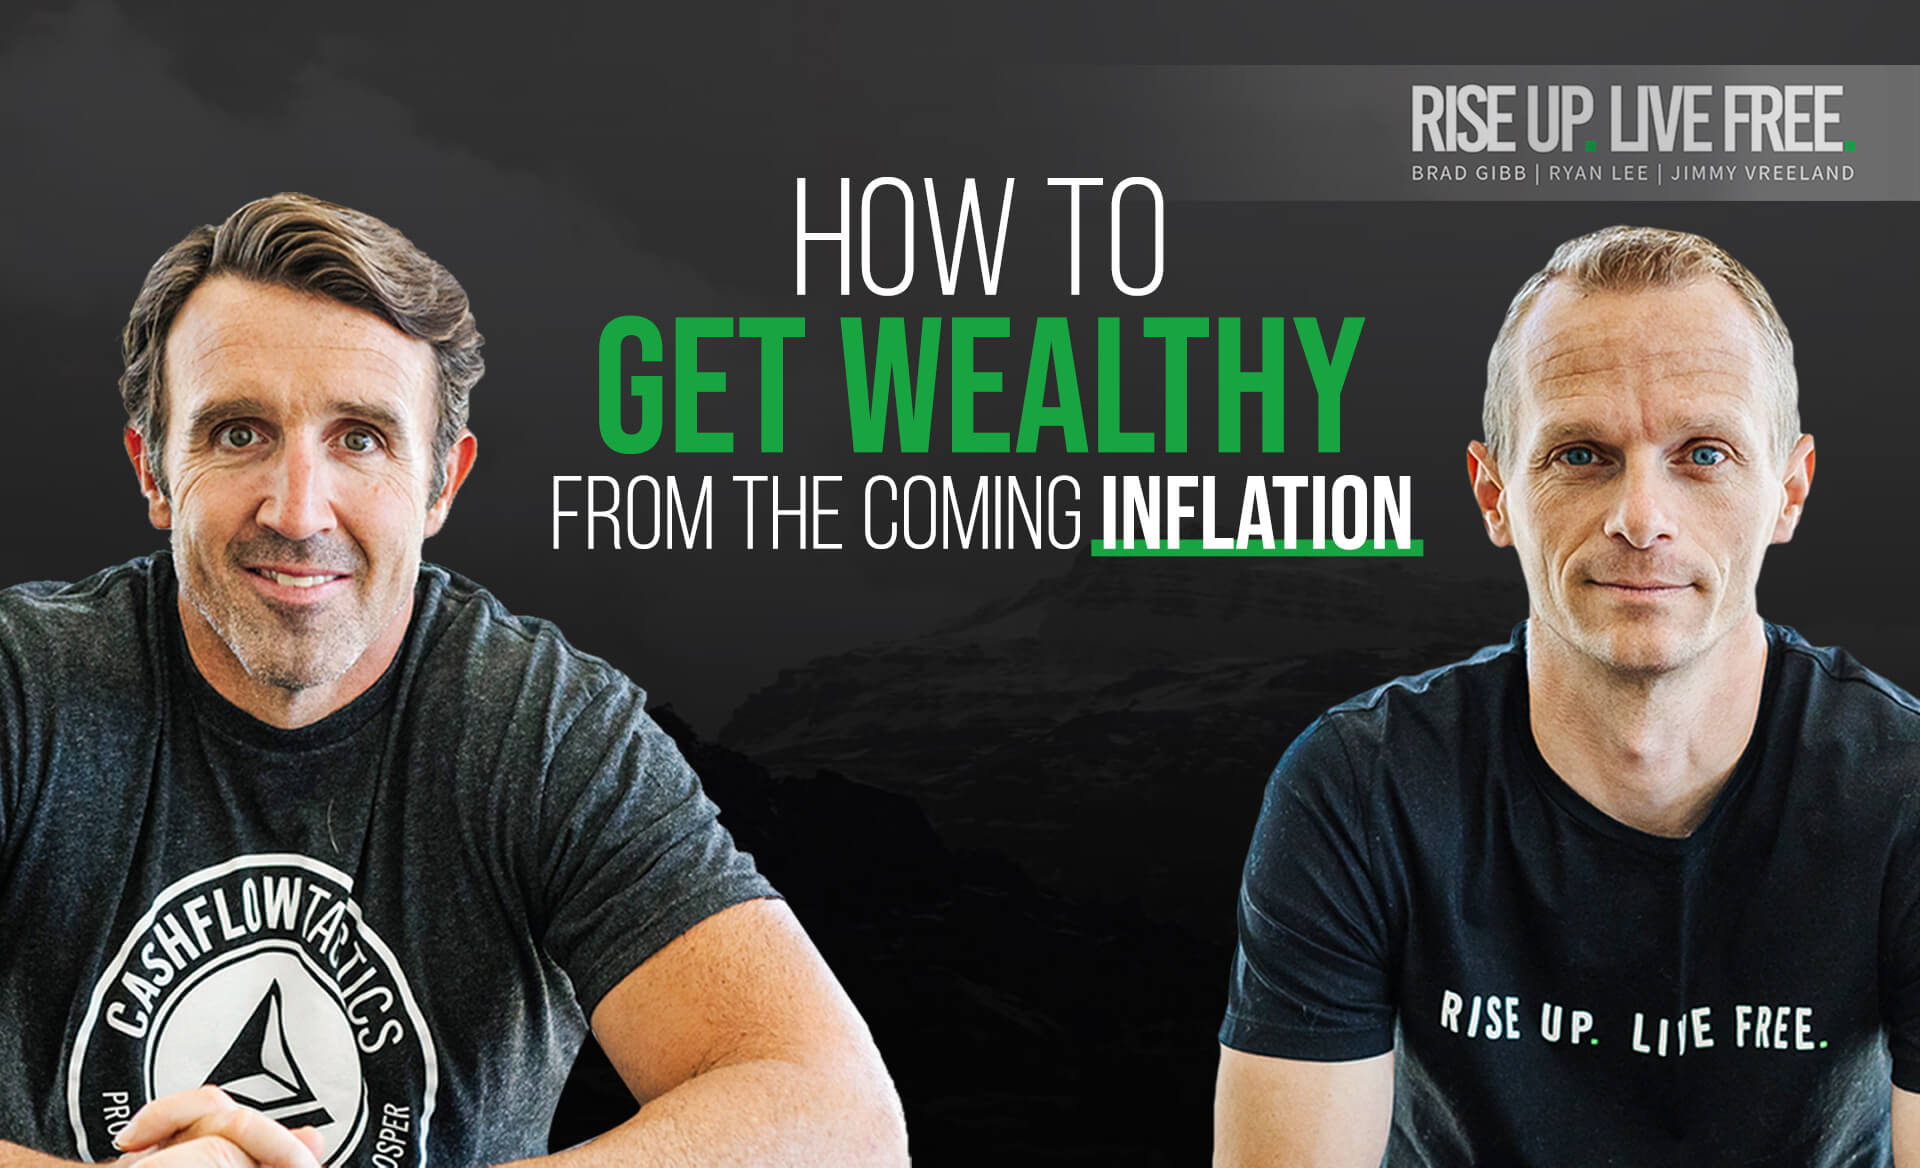 How to GET WEALTHY From the Coming Inflation